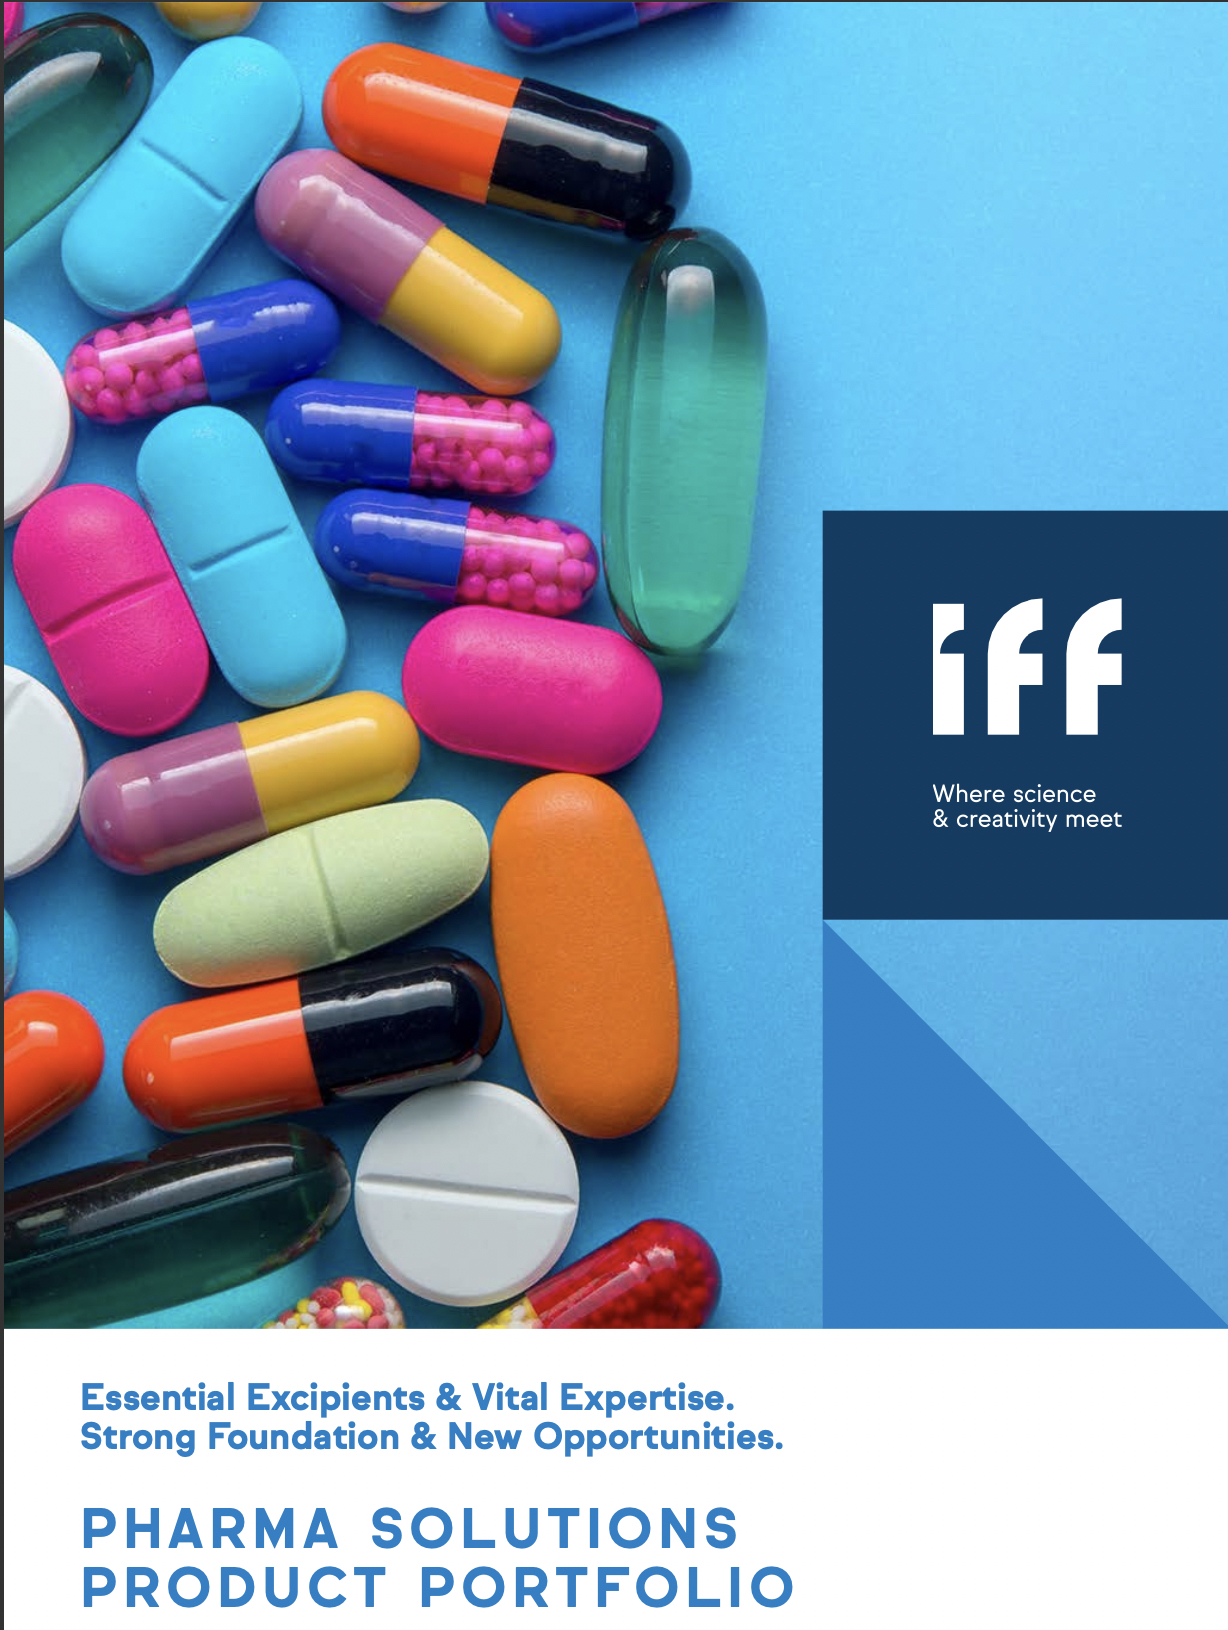 IFF Pharma Solutions - Unmatched Insights Meet Unwavering Ingenuity